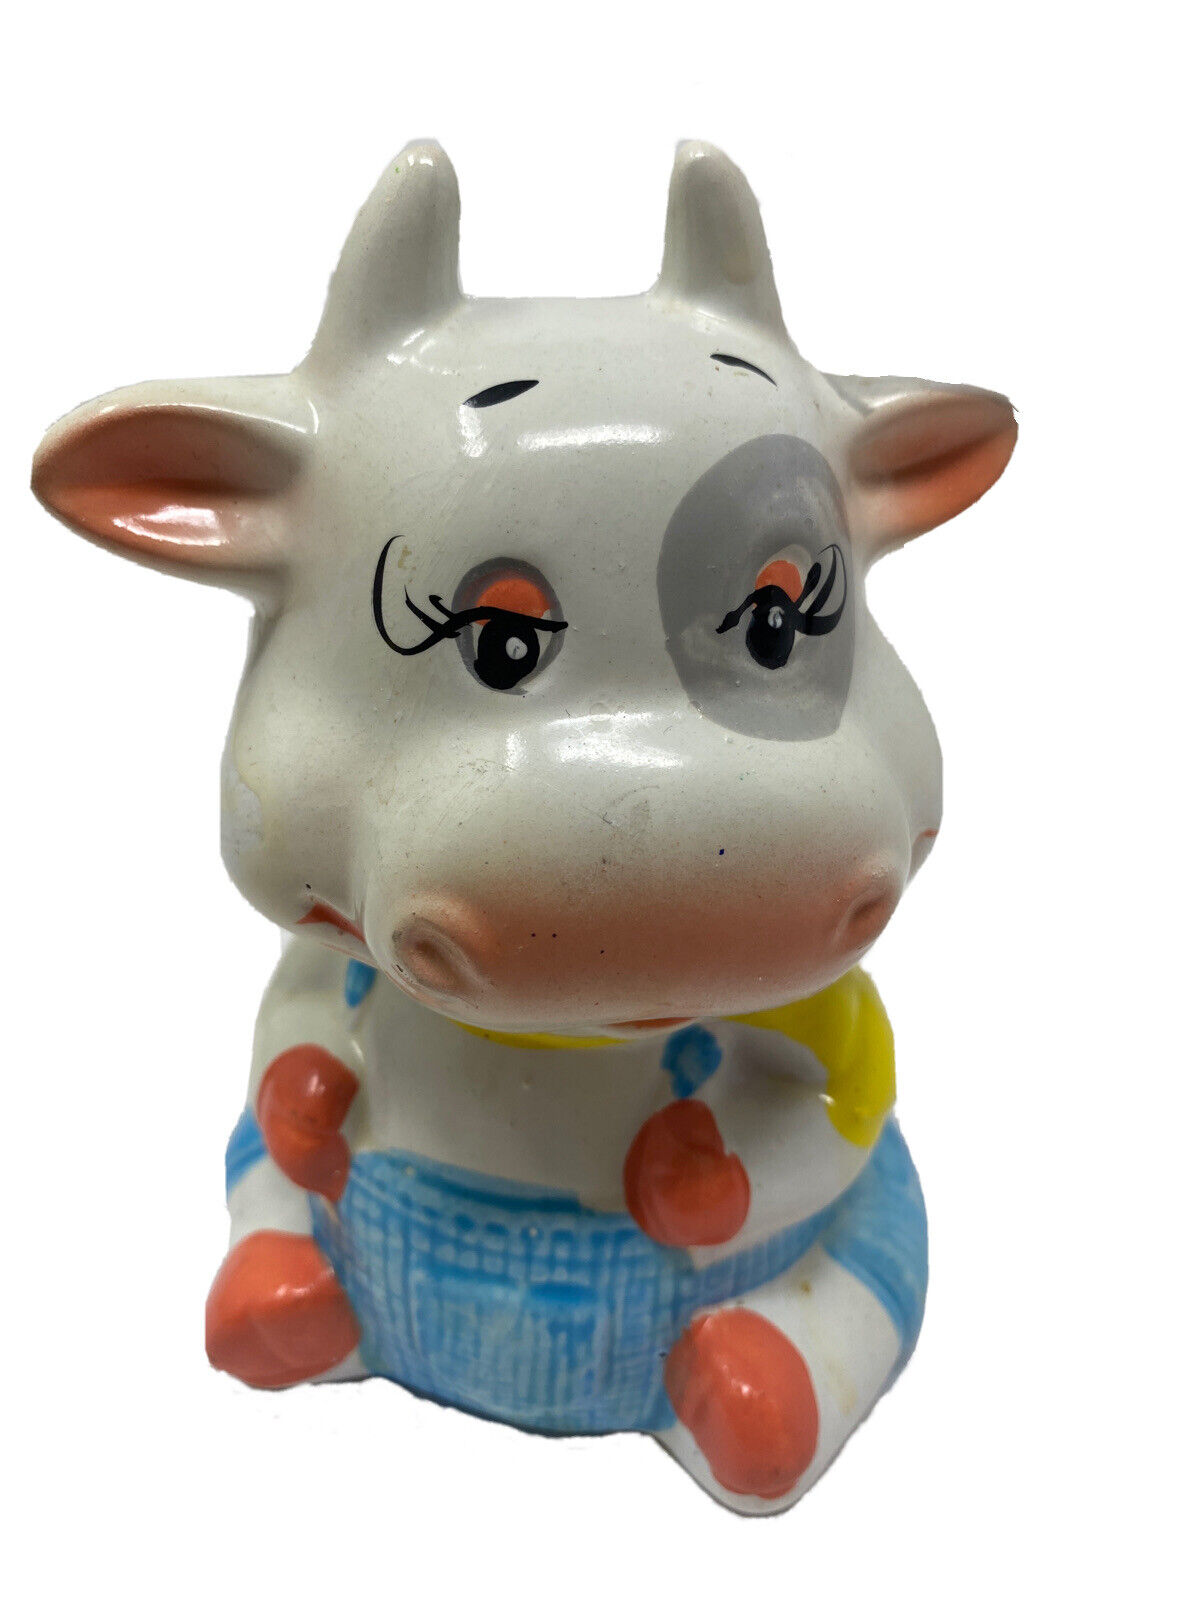 Vintage 50s Ceramic Coin Bank Sitting Cow with Blue Pants